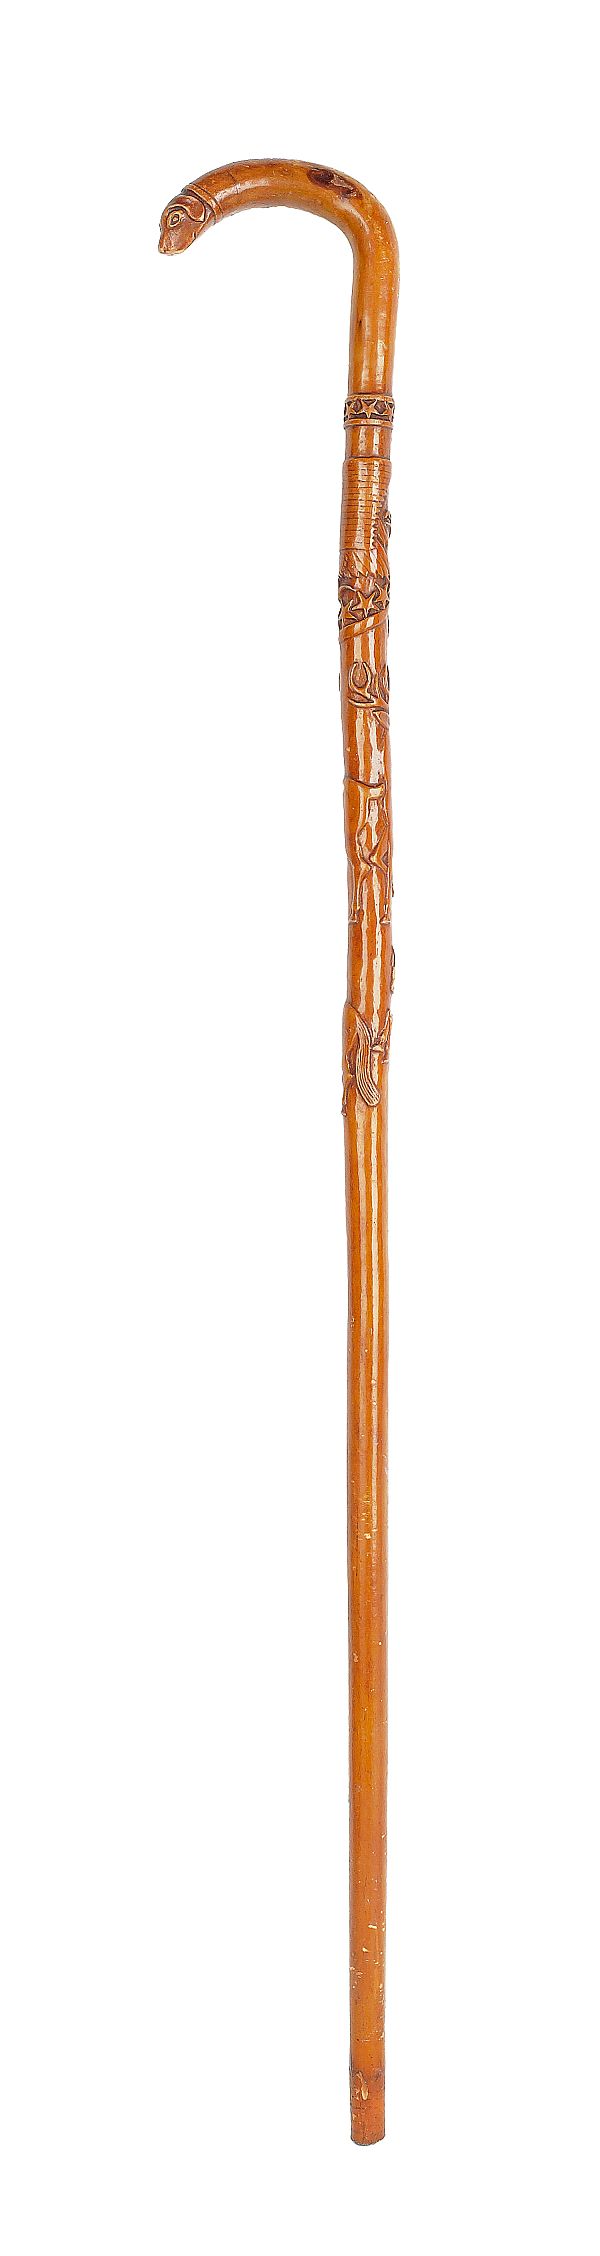 Pennsylvania carved cane late 19th